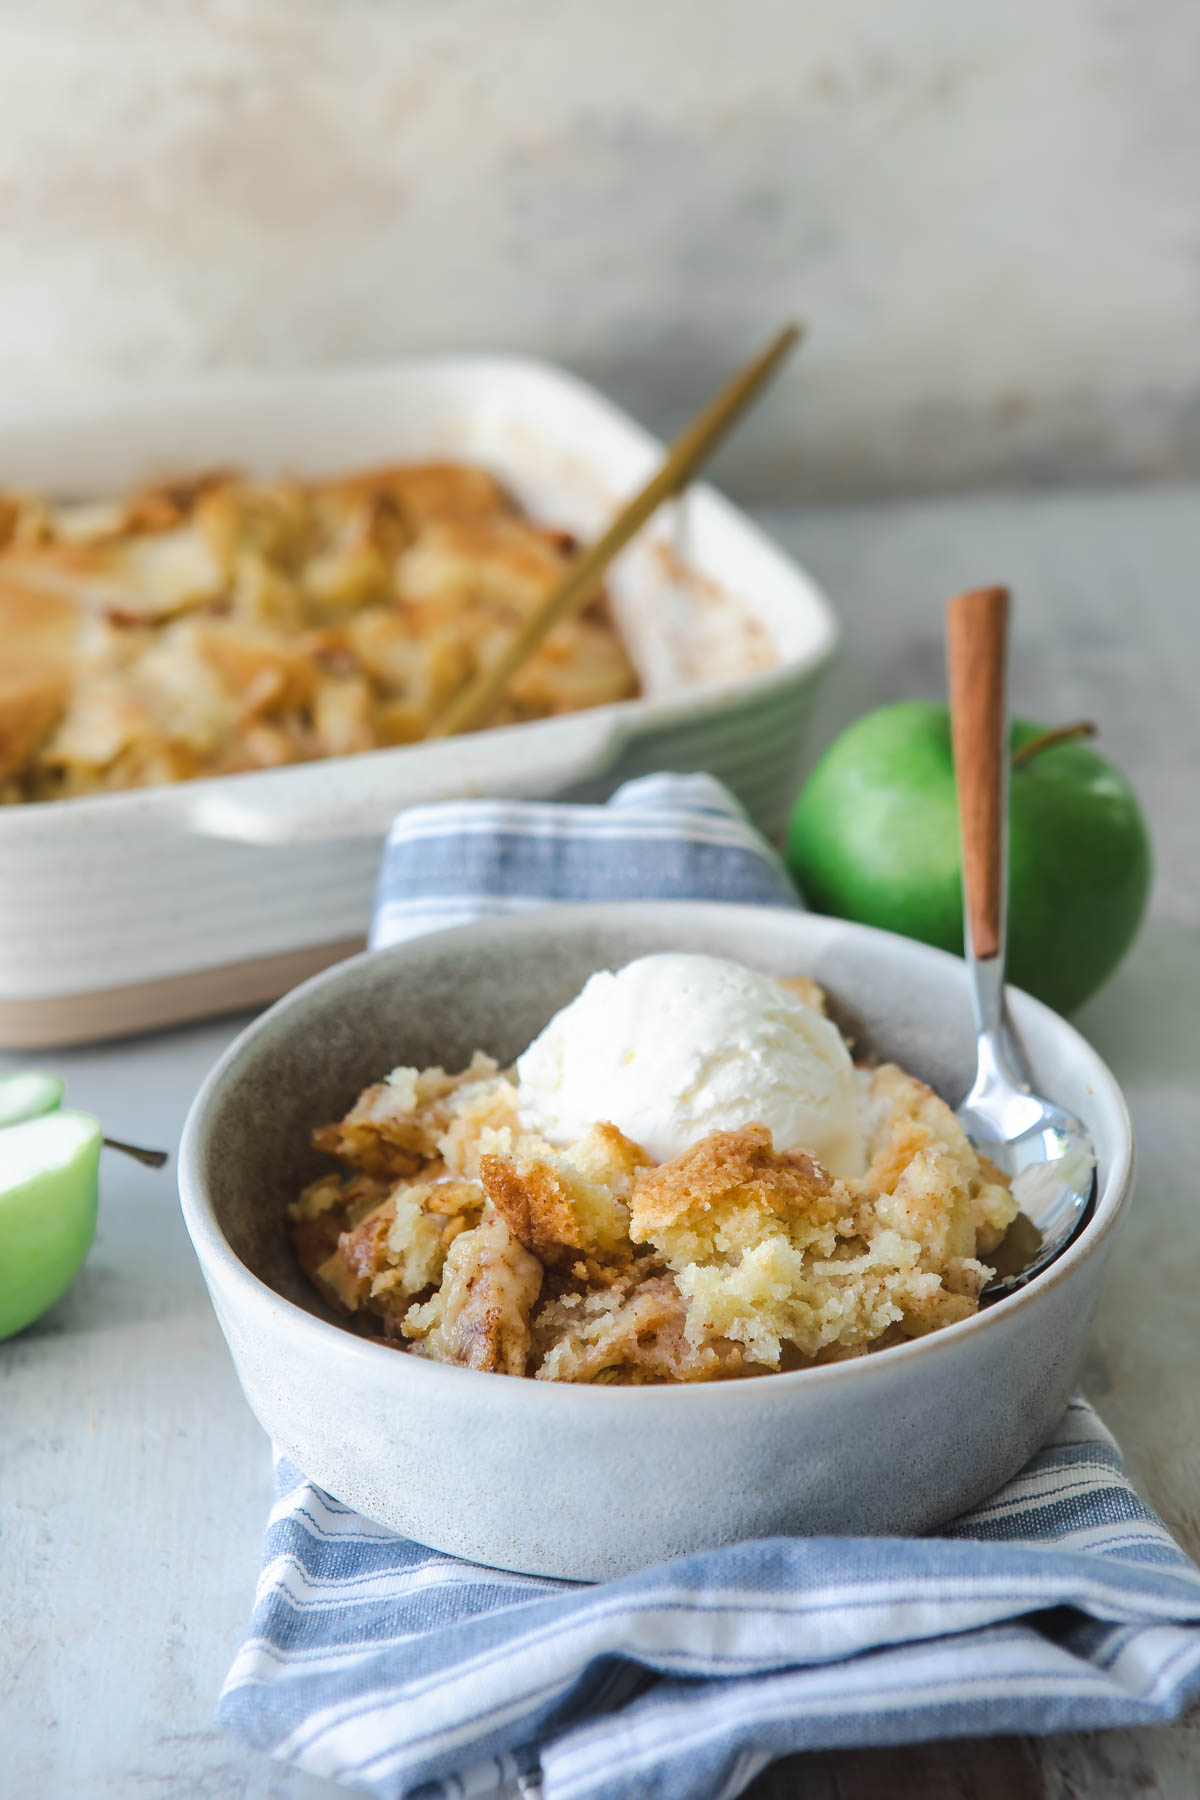 A dish of apple cobbler with ice cream on top.